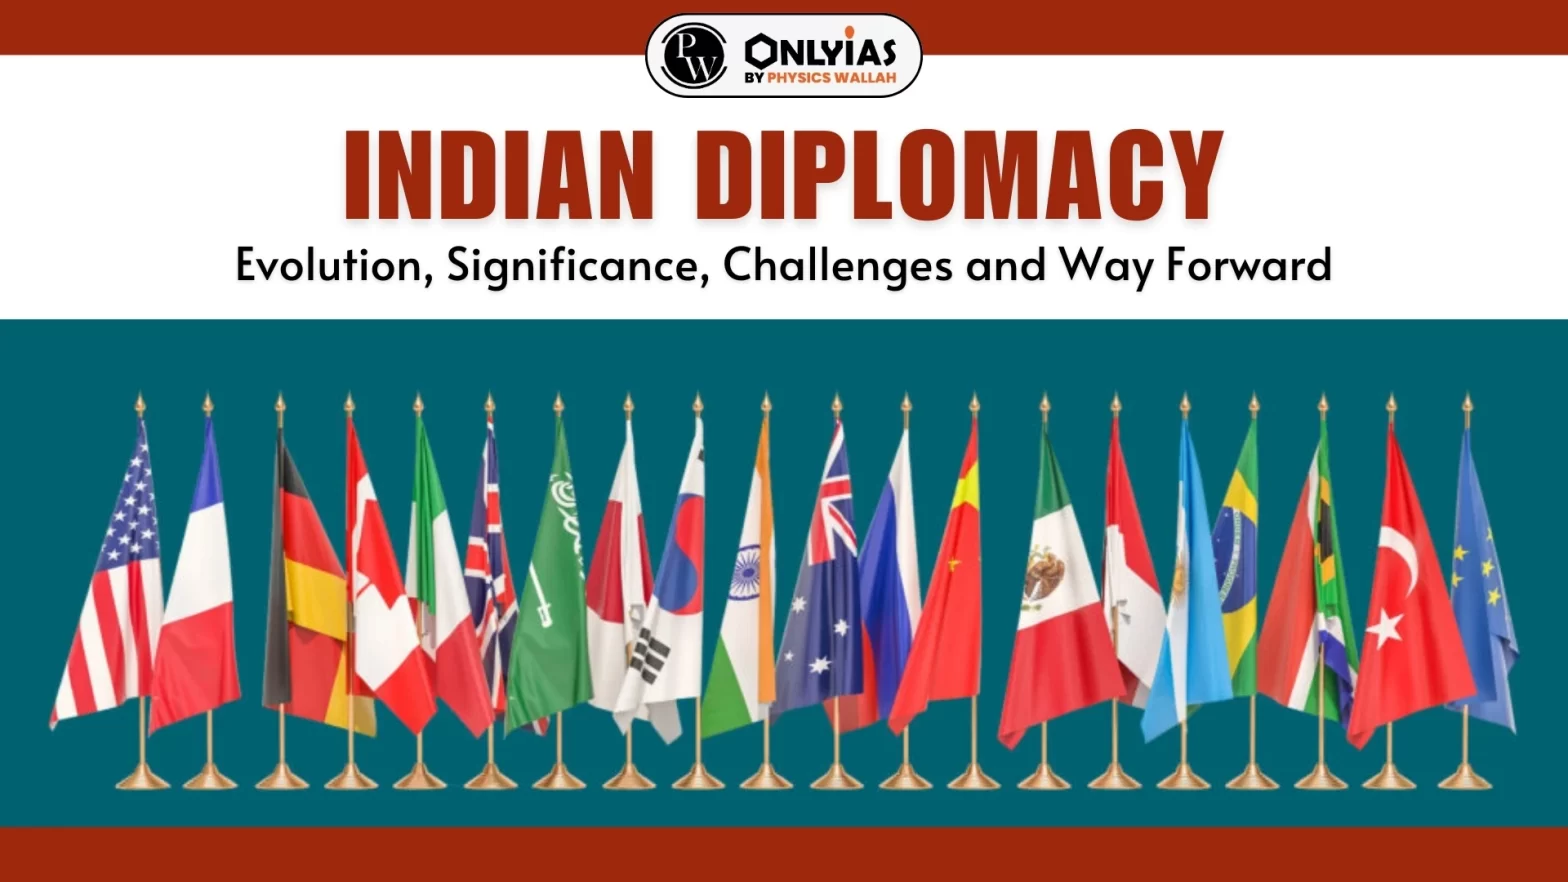 Indian Diplomacy: Evolution, Significance, Challenges and Way Forward